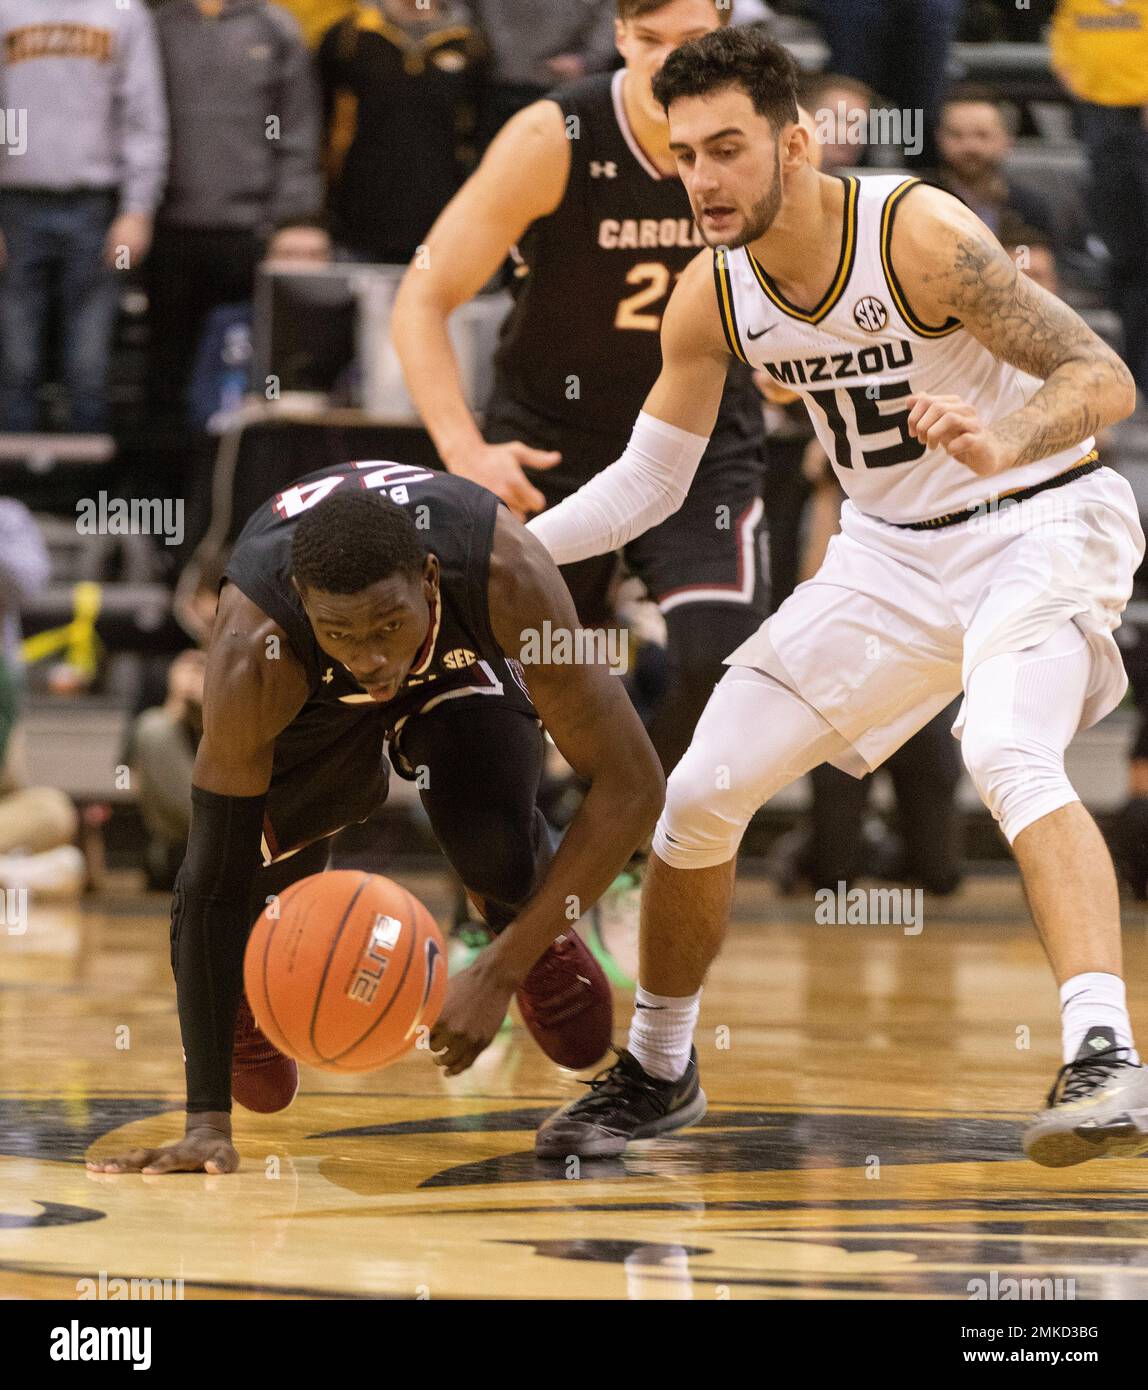 South Carolina's Keyshawn Bryant, left, and Missouri's Jordan Geist, right,  scramble for a loose ball during the first half of an NCAA college  basketball game Saturday, March 2, 2019, in Columbia, Mo. (